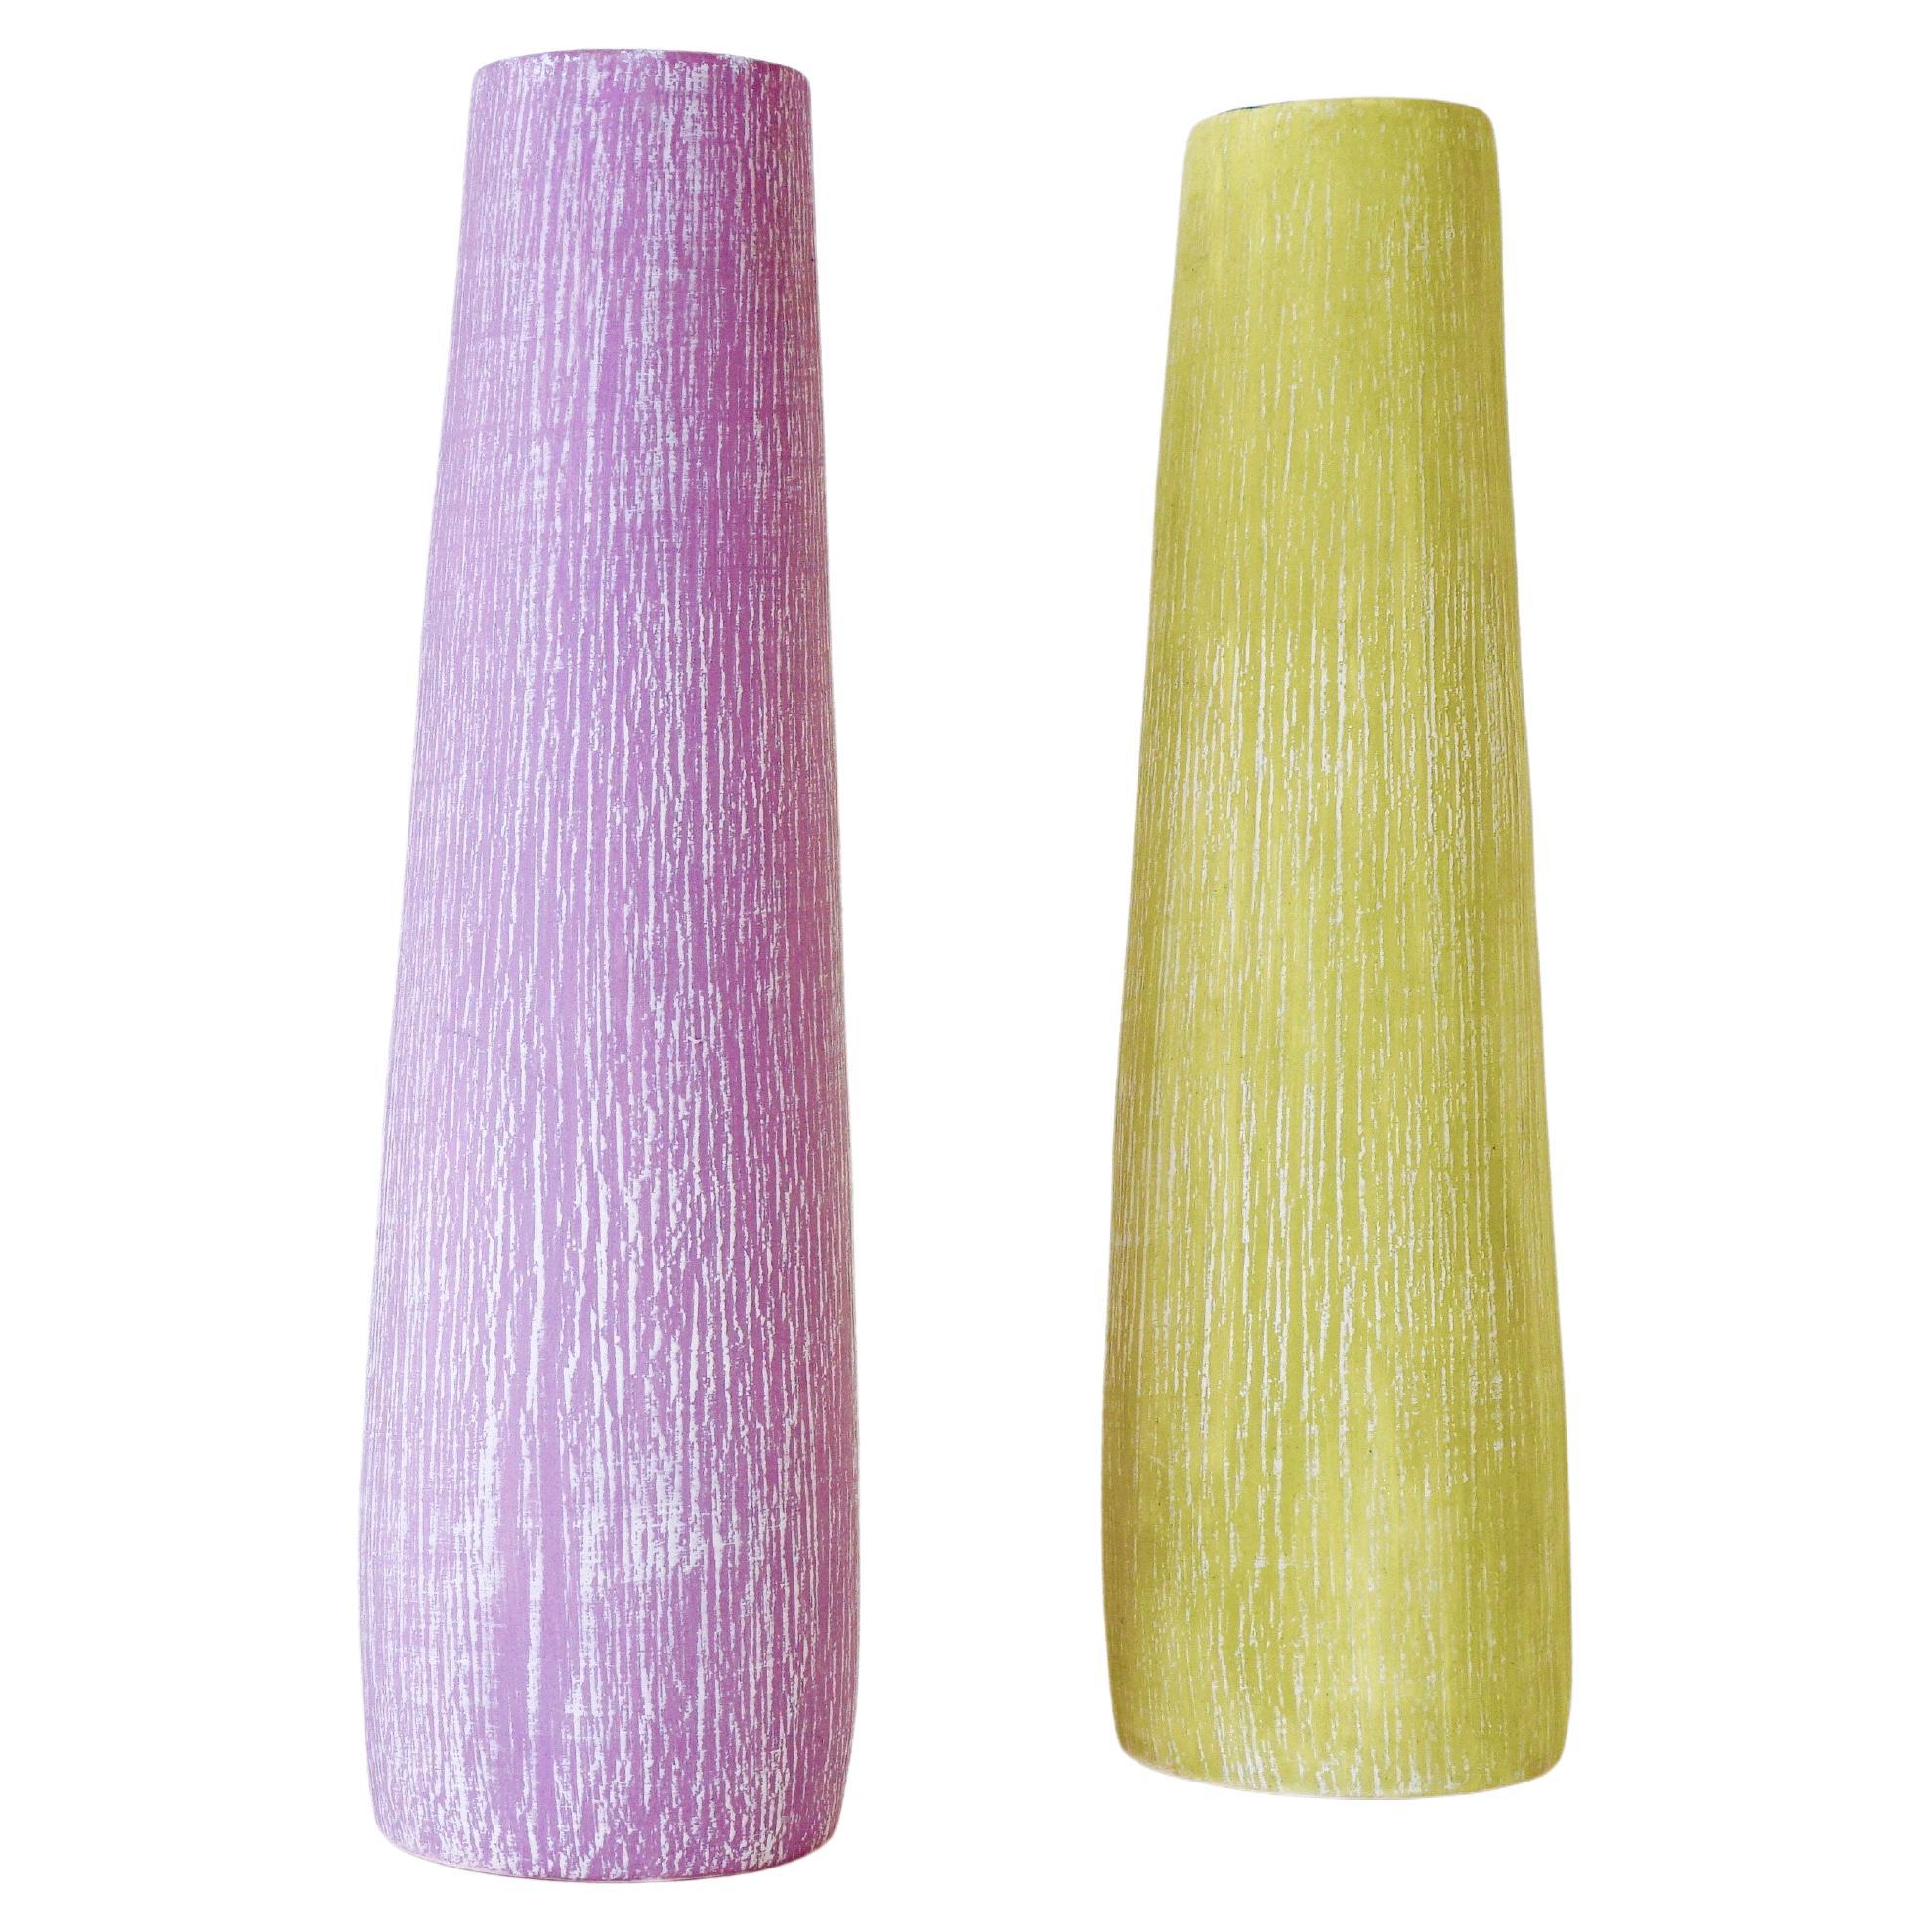 Colored Vases from Finland, Set of 2